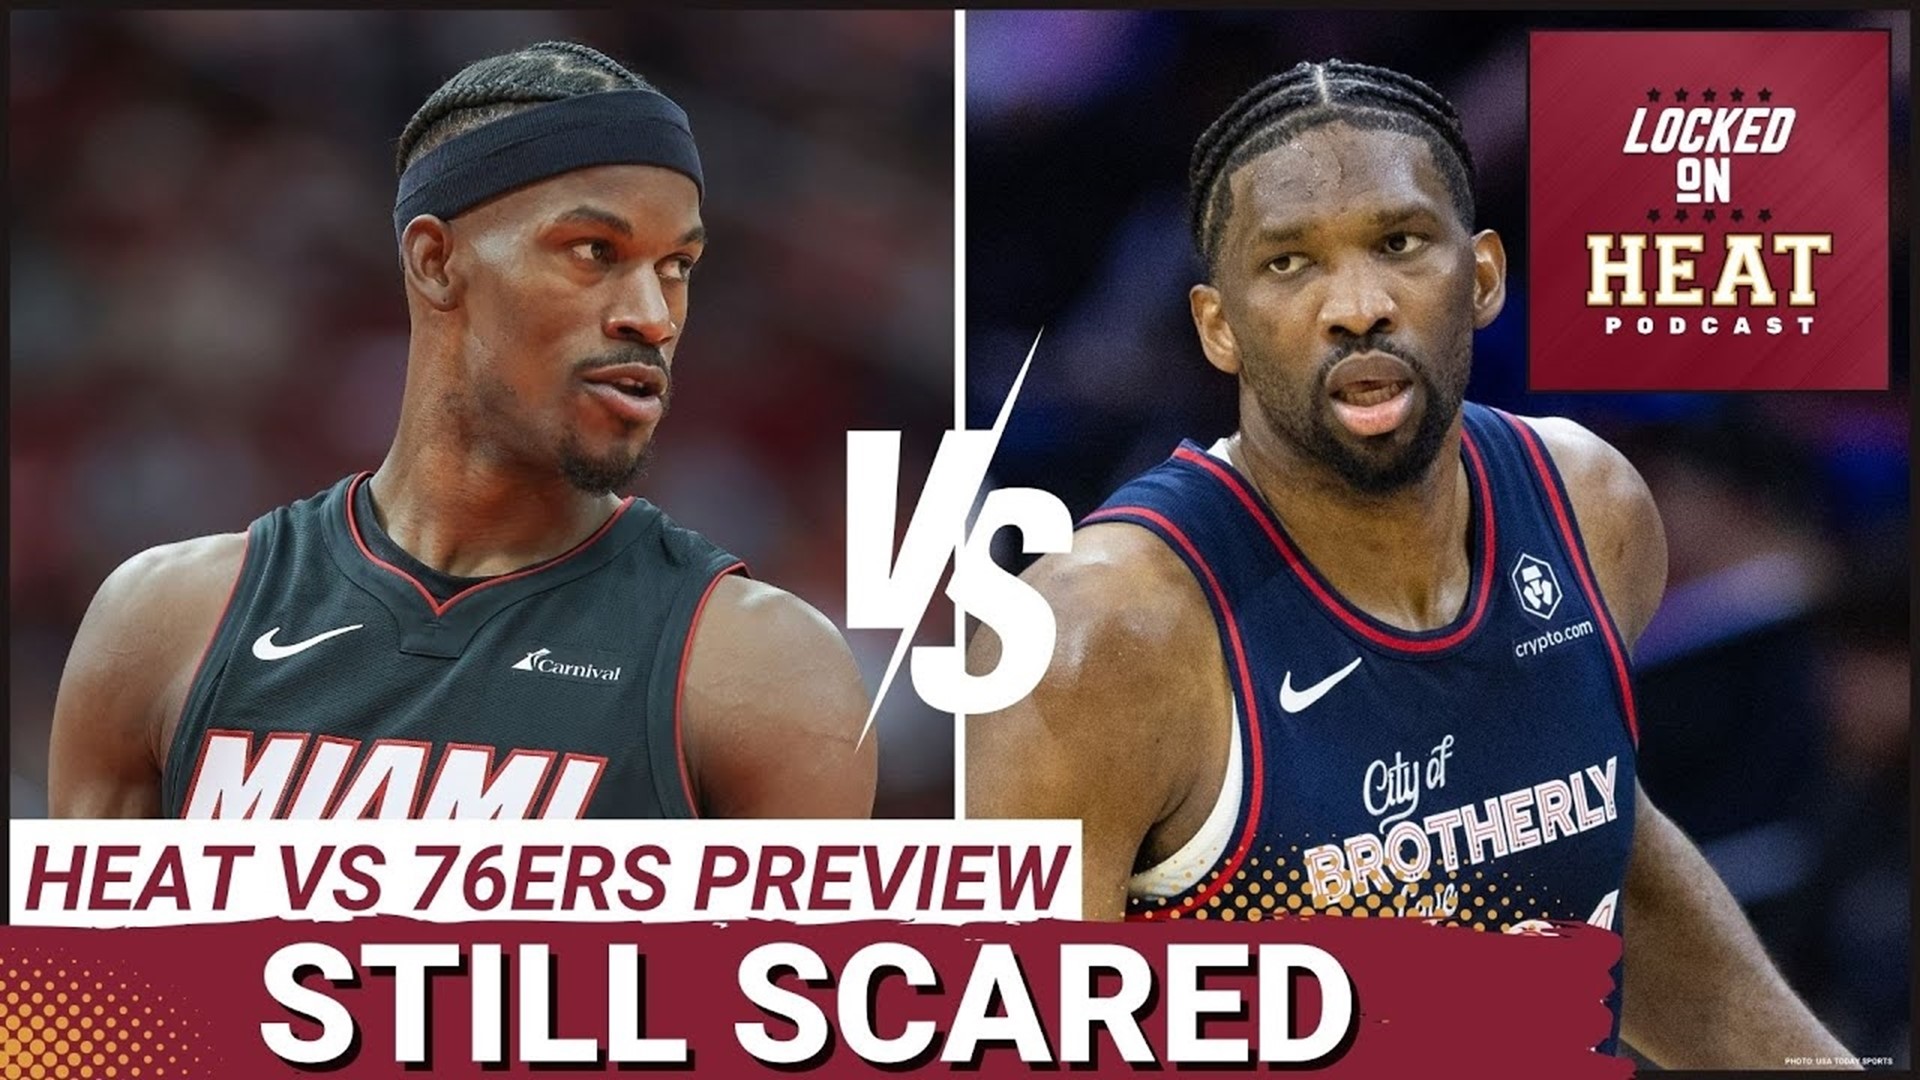 On today's episode, it's a big Miami Heat vs Philadelphia 76ers play-in tournament preview.